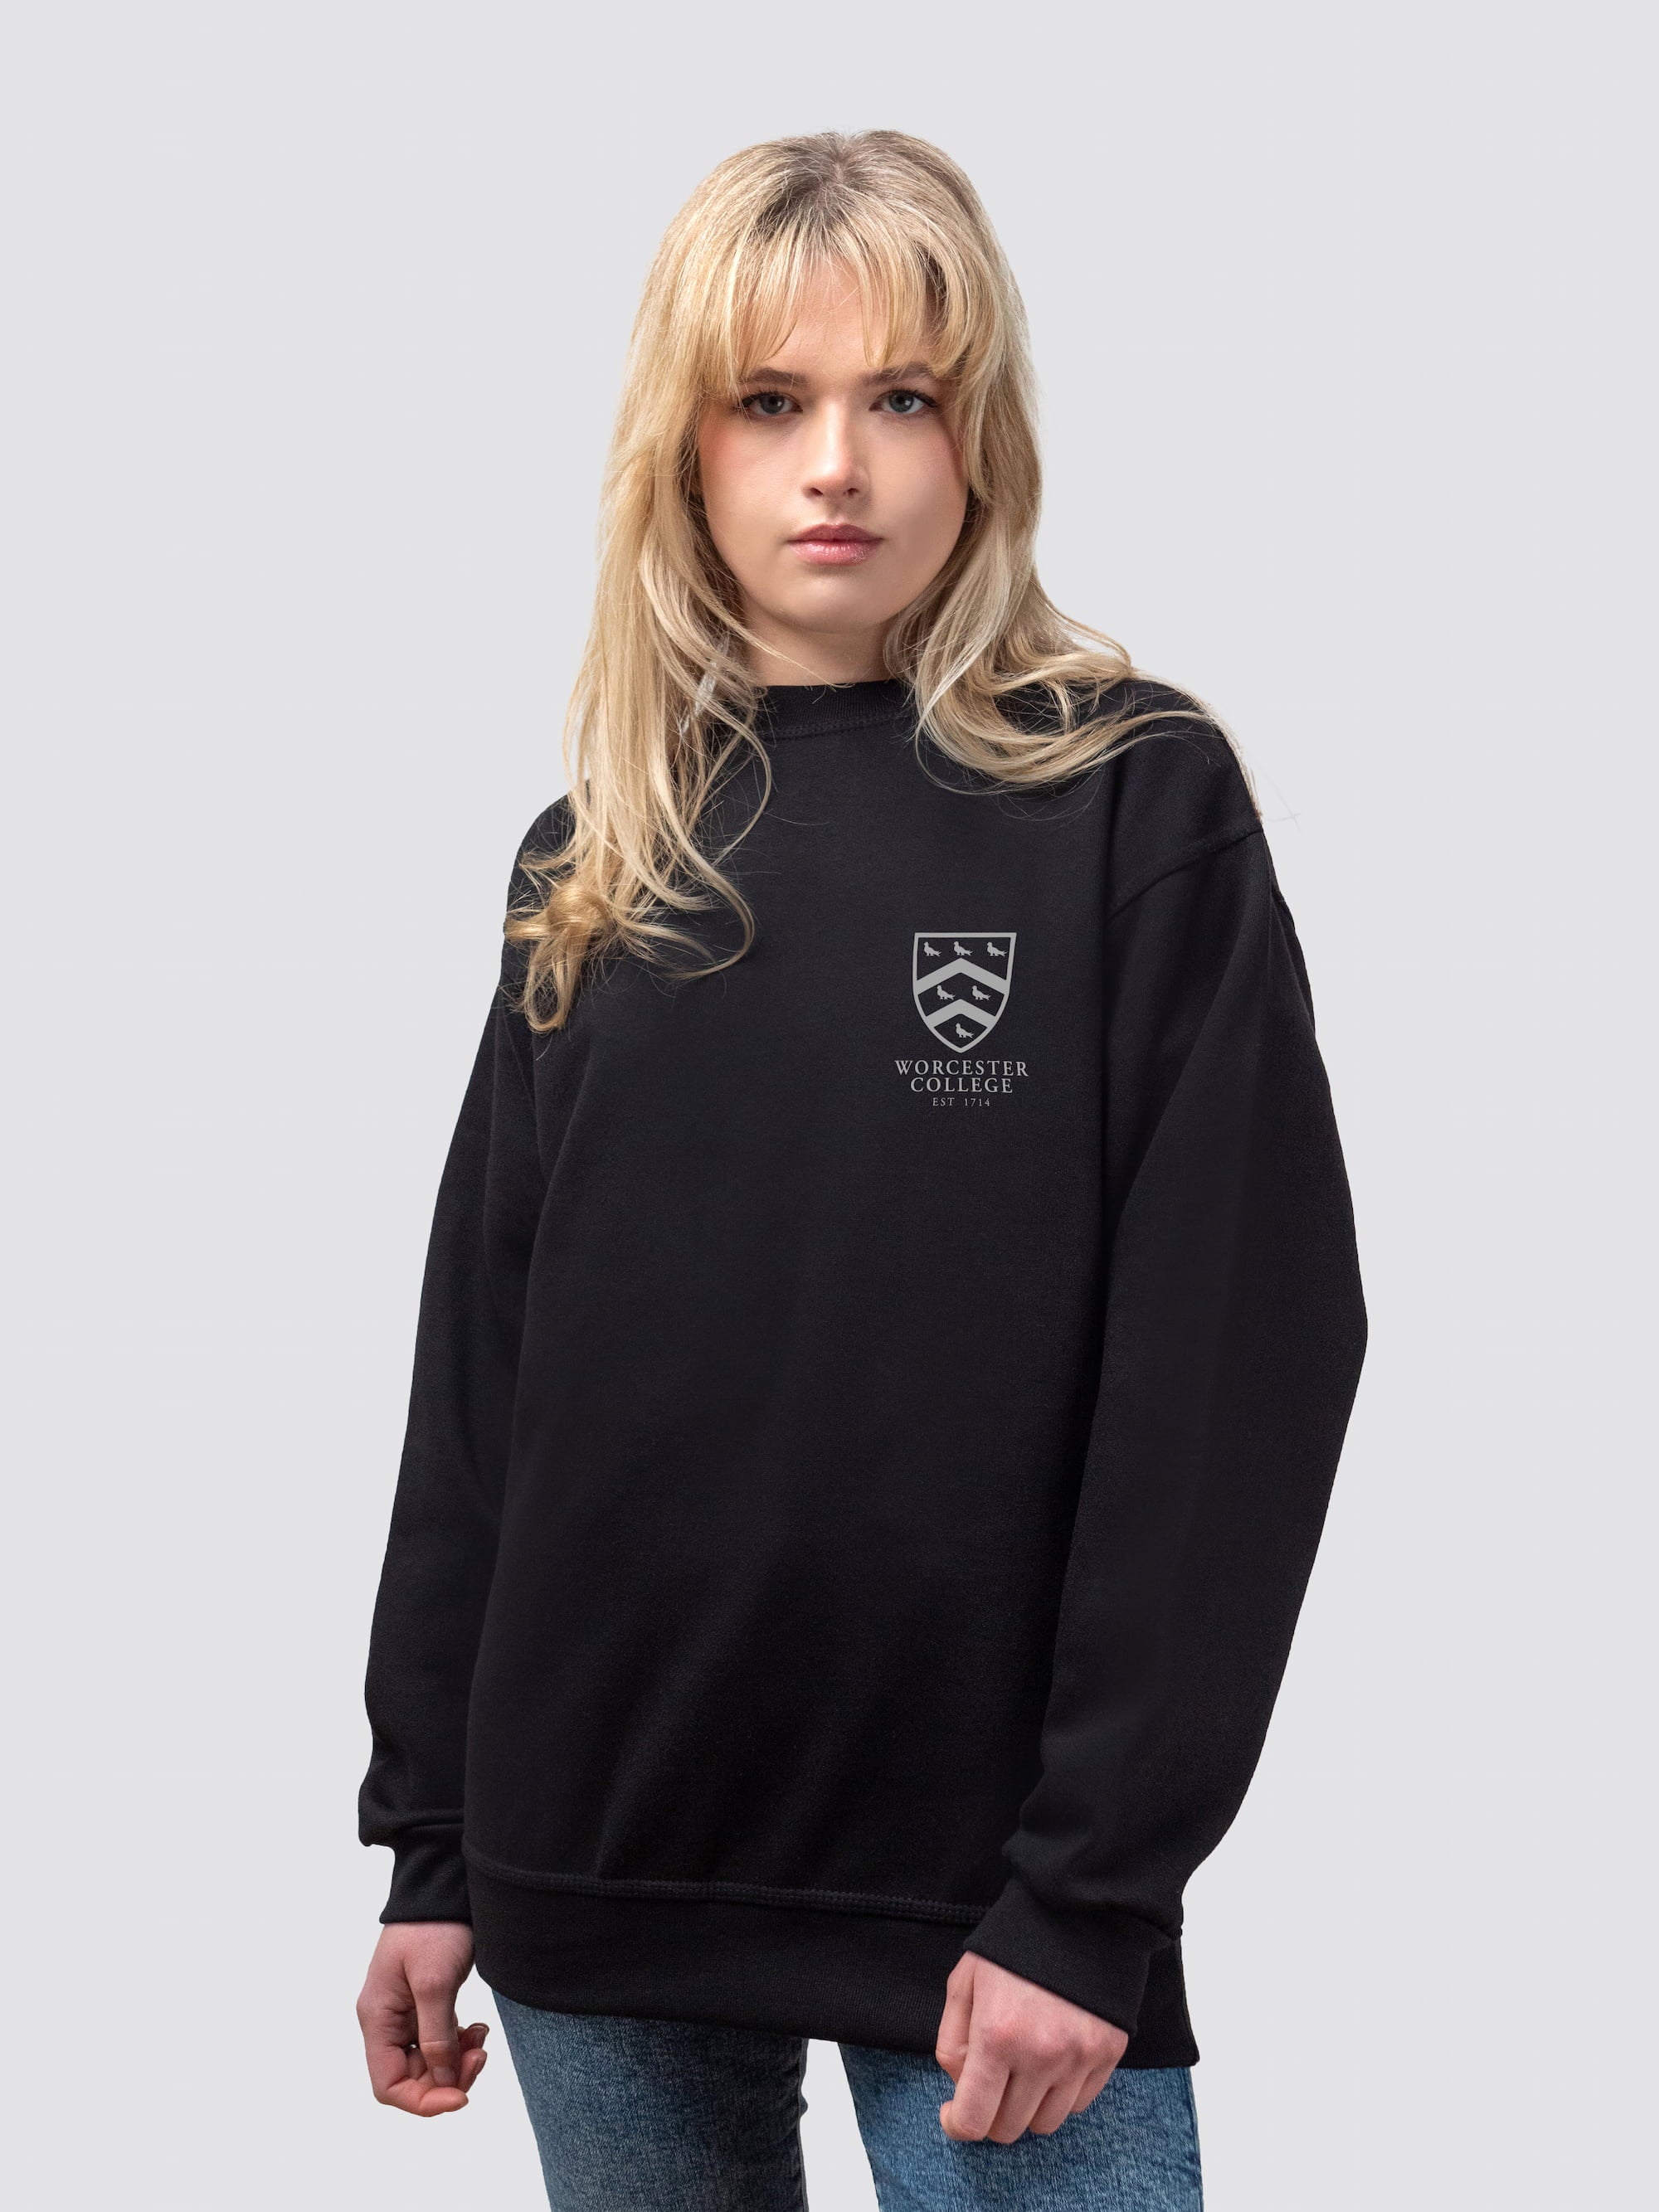 Worcester crest on the front of a black, crew-neck sweatshirt 